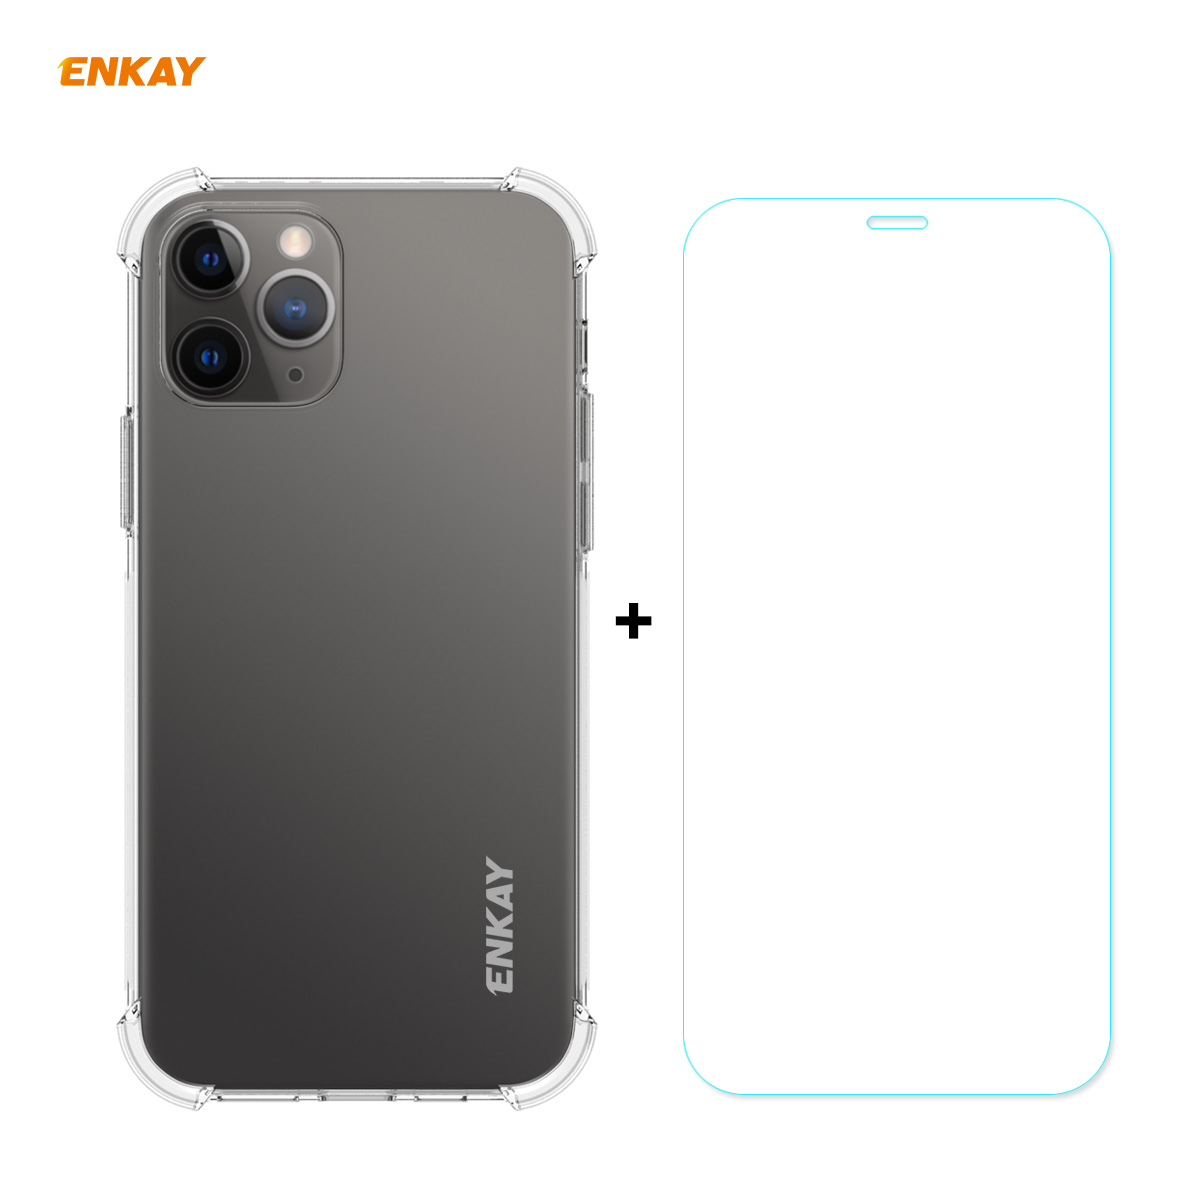 Enkay-2-in-1-for-iPhone-12-Pro-Max-Accessories-with-Airbags-Non-Yellow-Transparent-TPU-Protective-Ca-1769387-1